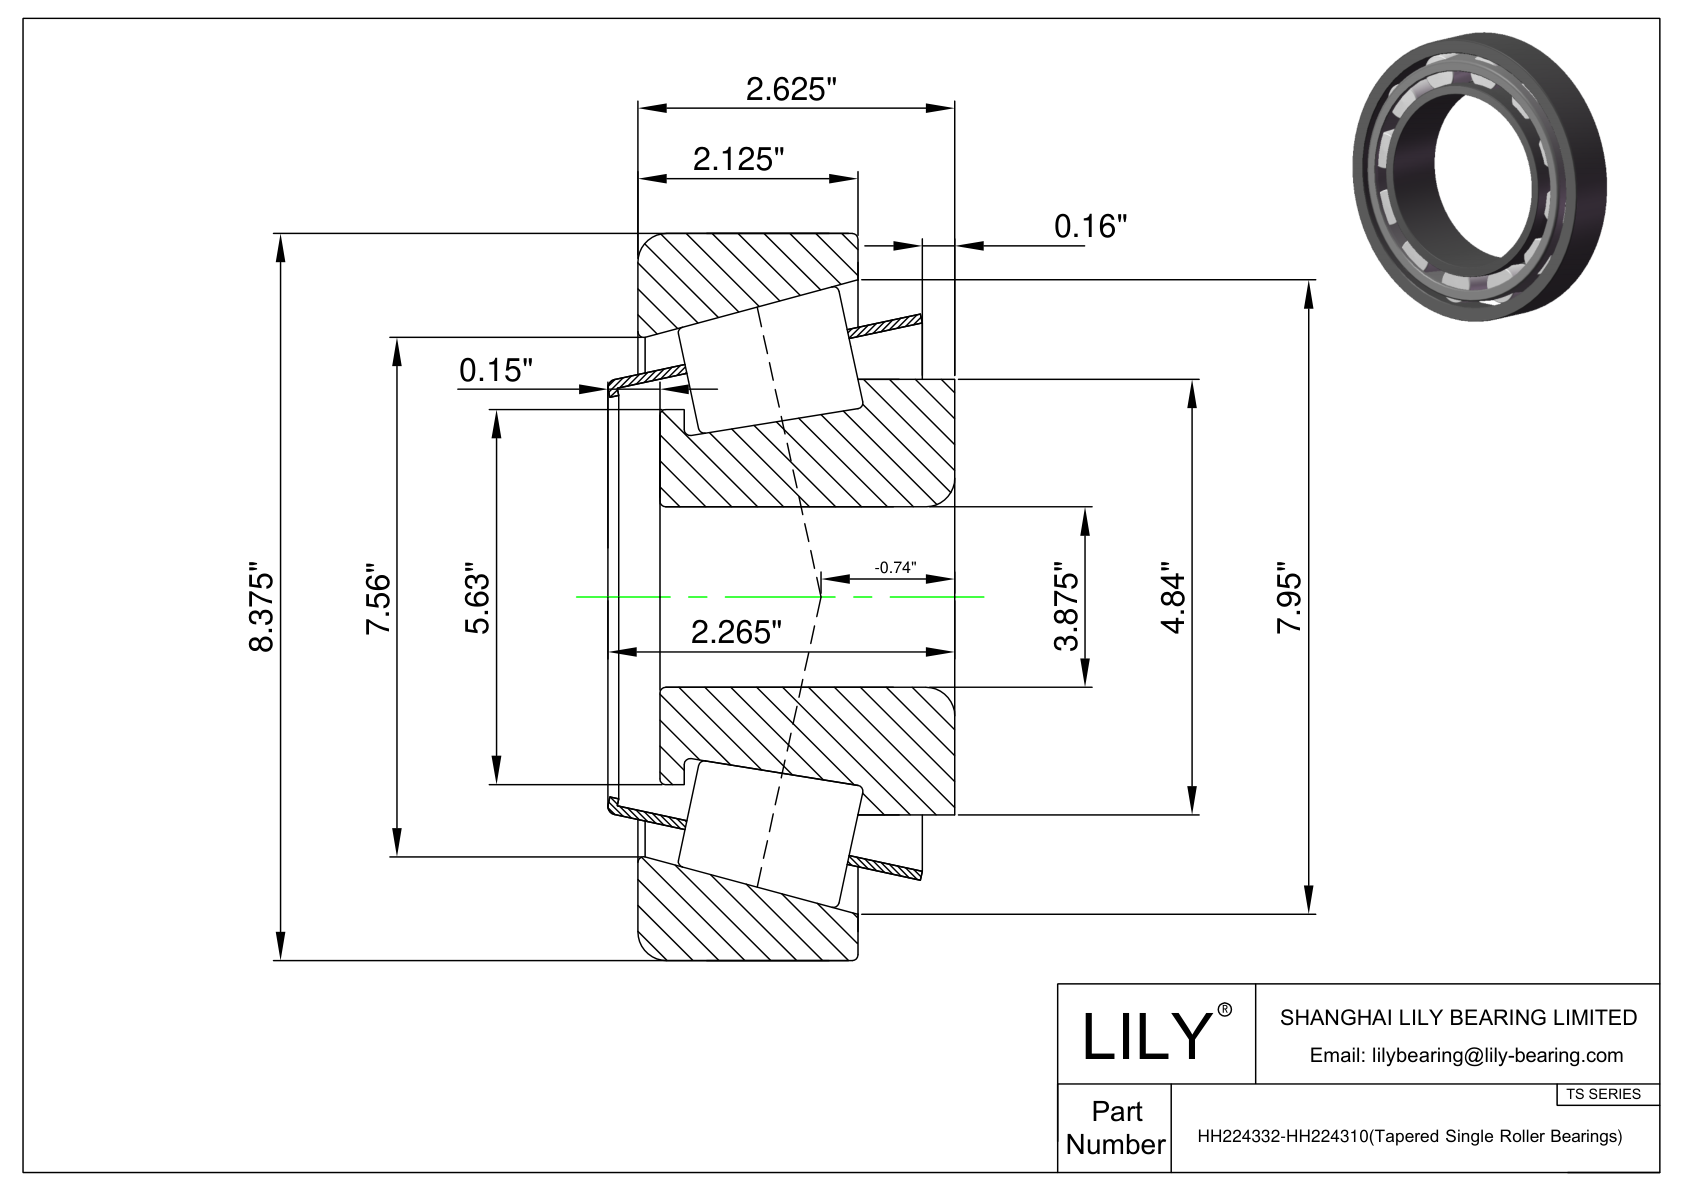 HH224332-HH224310 TS (Tapered Single Roller Bearings) (Imperial) cad drawing